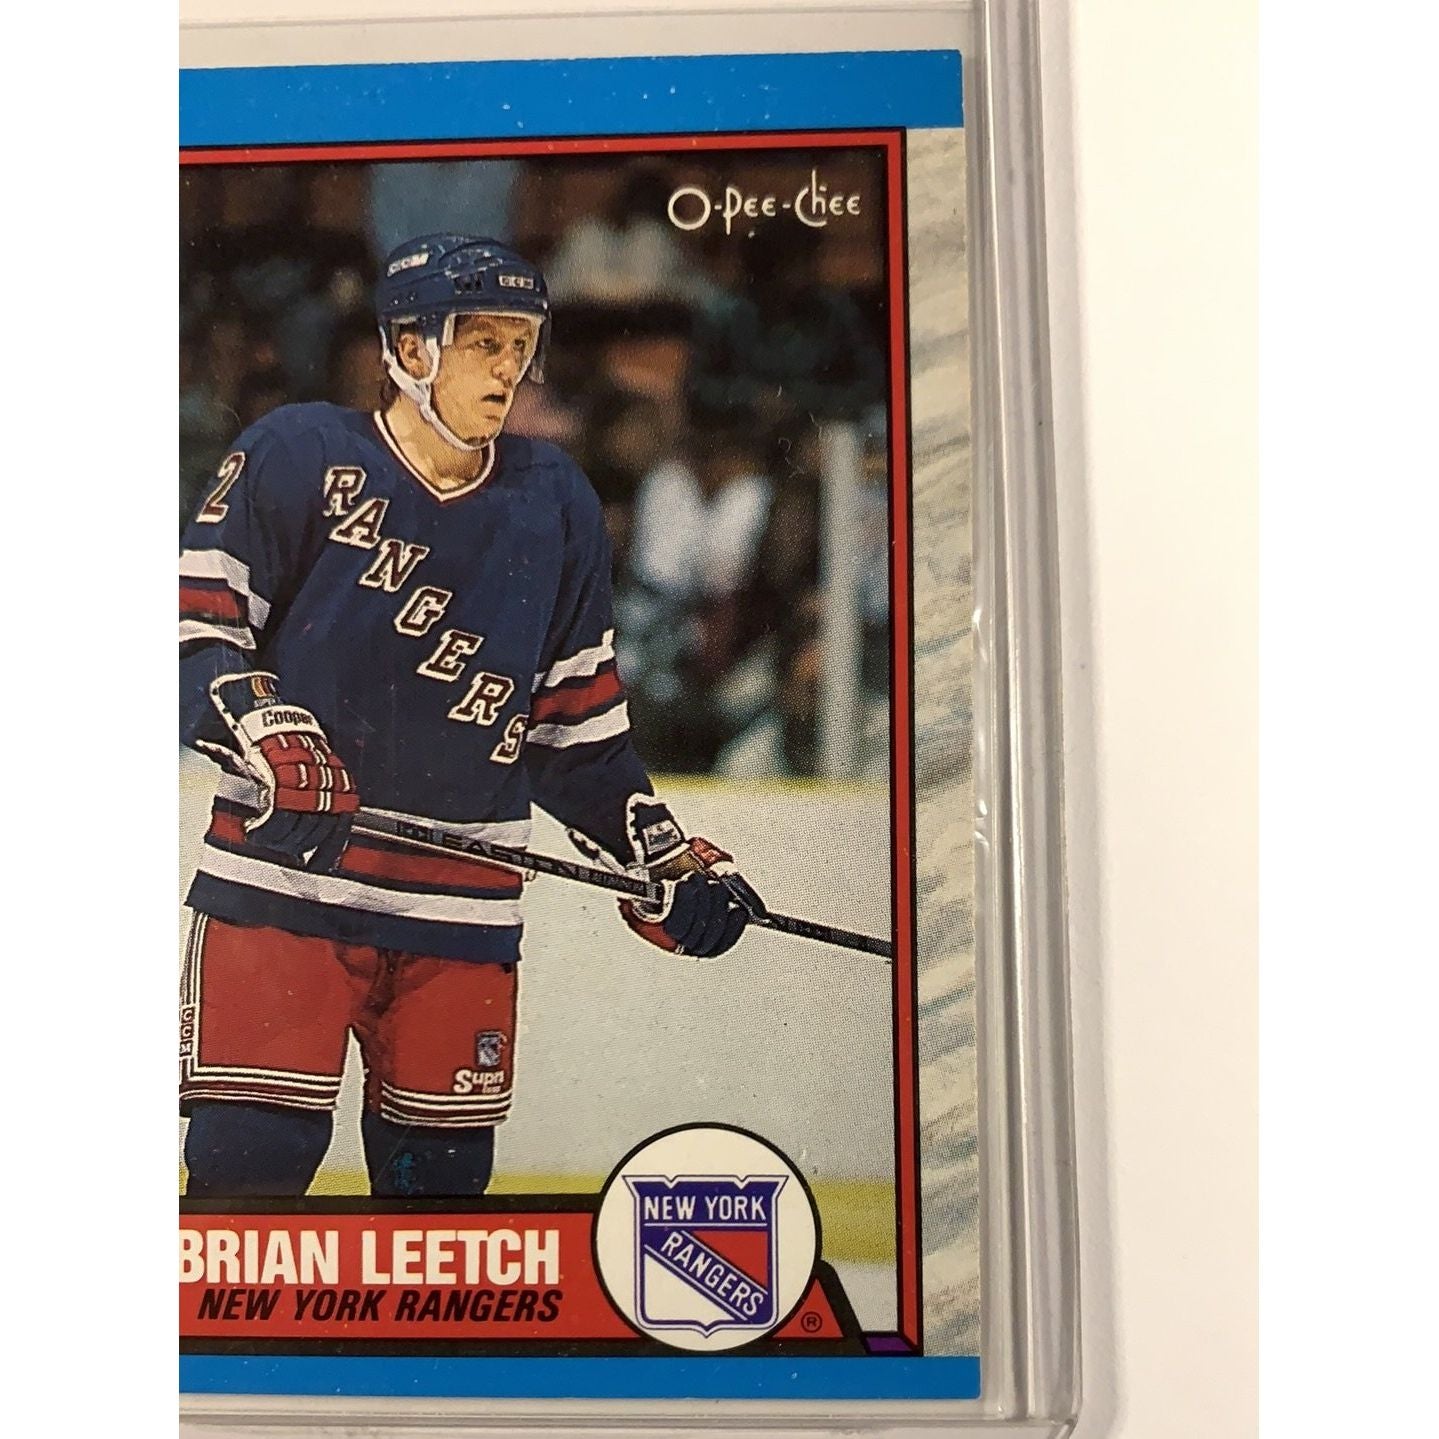  1989-90 0-Pee-Chee Brian Leetch RC  Local Legends Cards & Collectibles